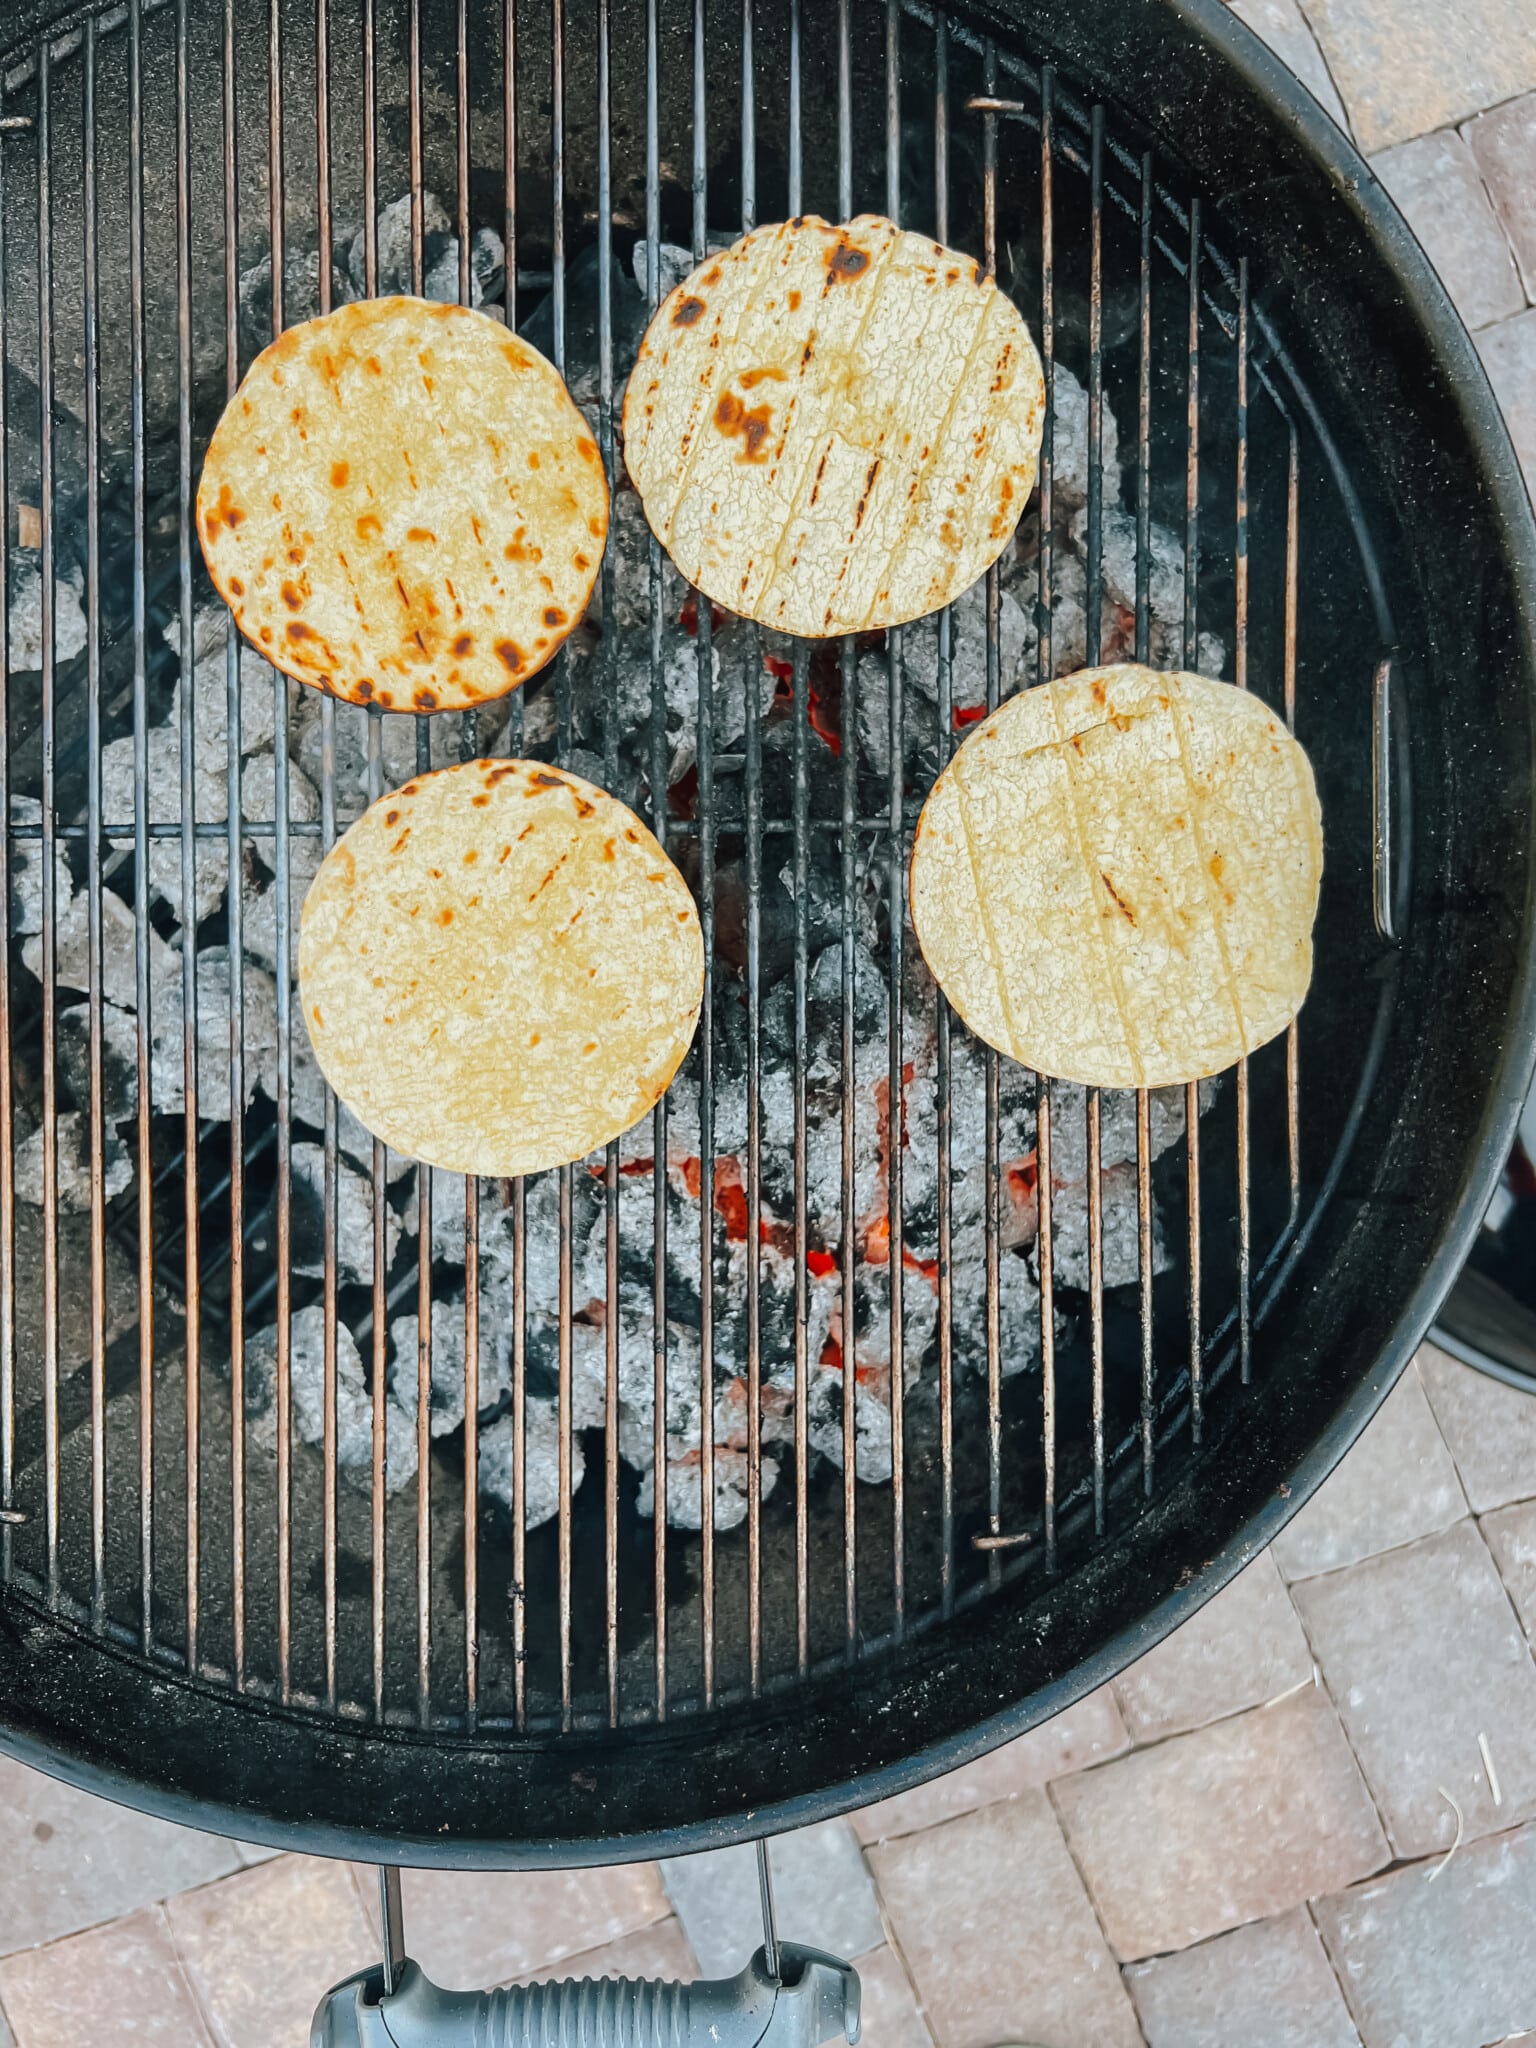 tortillas on grill grate over lit charcoal.